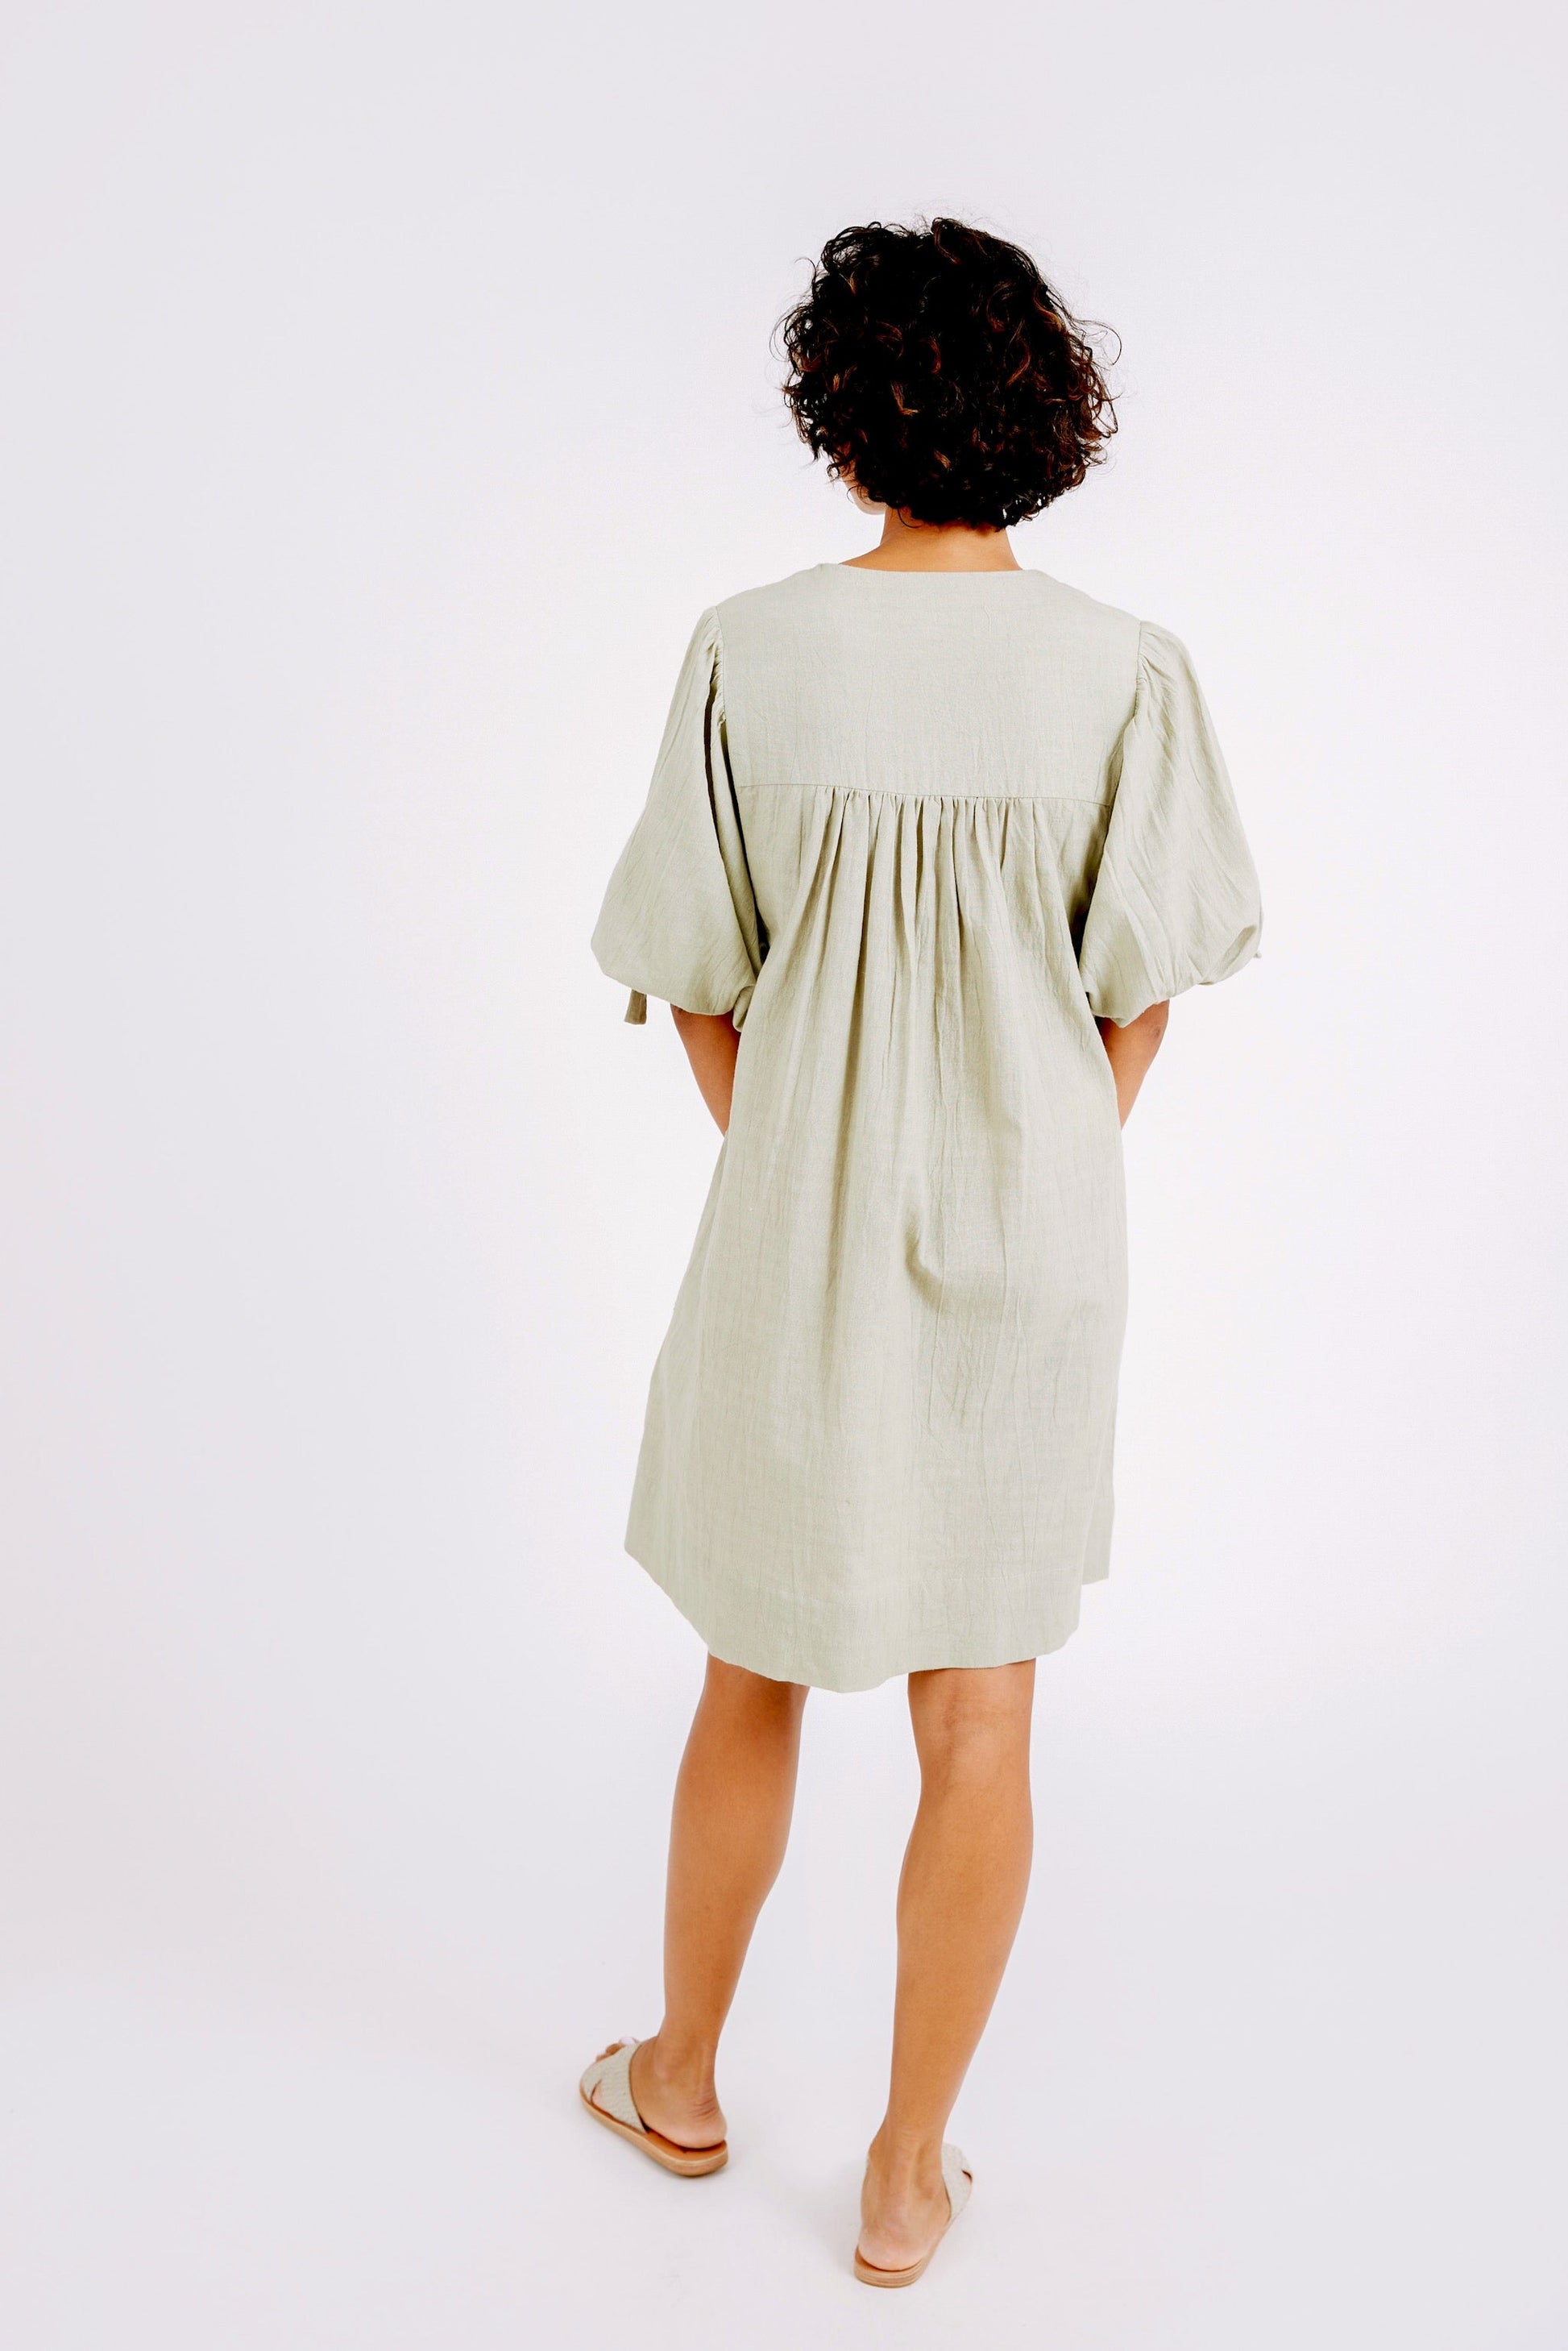 An easy, pullover style dress with a relaxed fit, made with 100% cotton that's hand loomed to give it a linen feel. Ethically made in India.